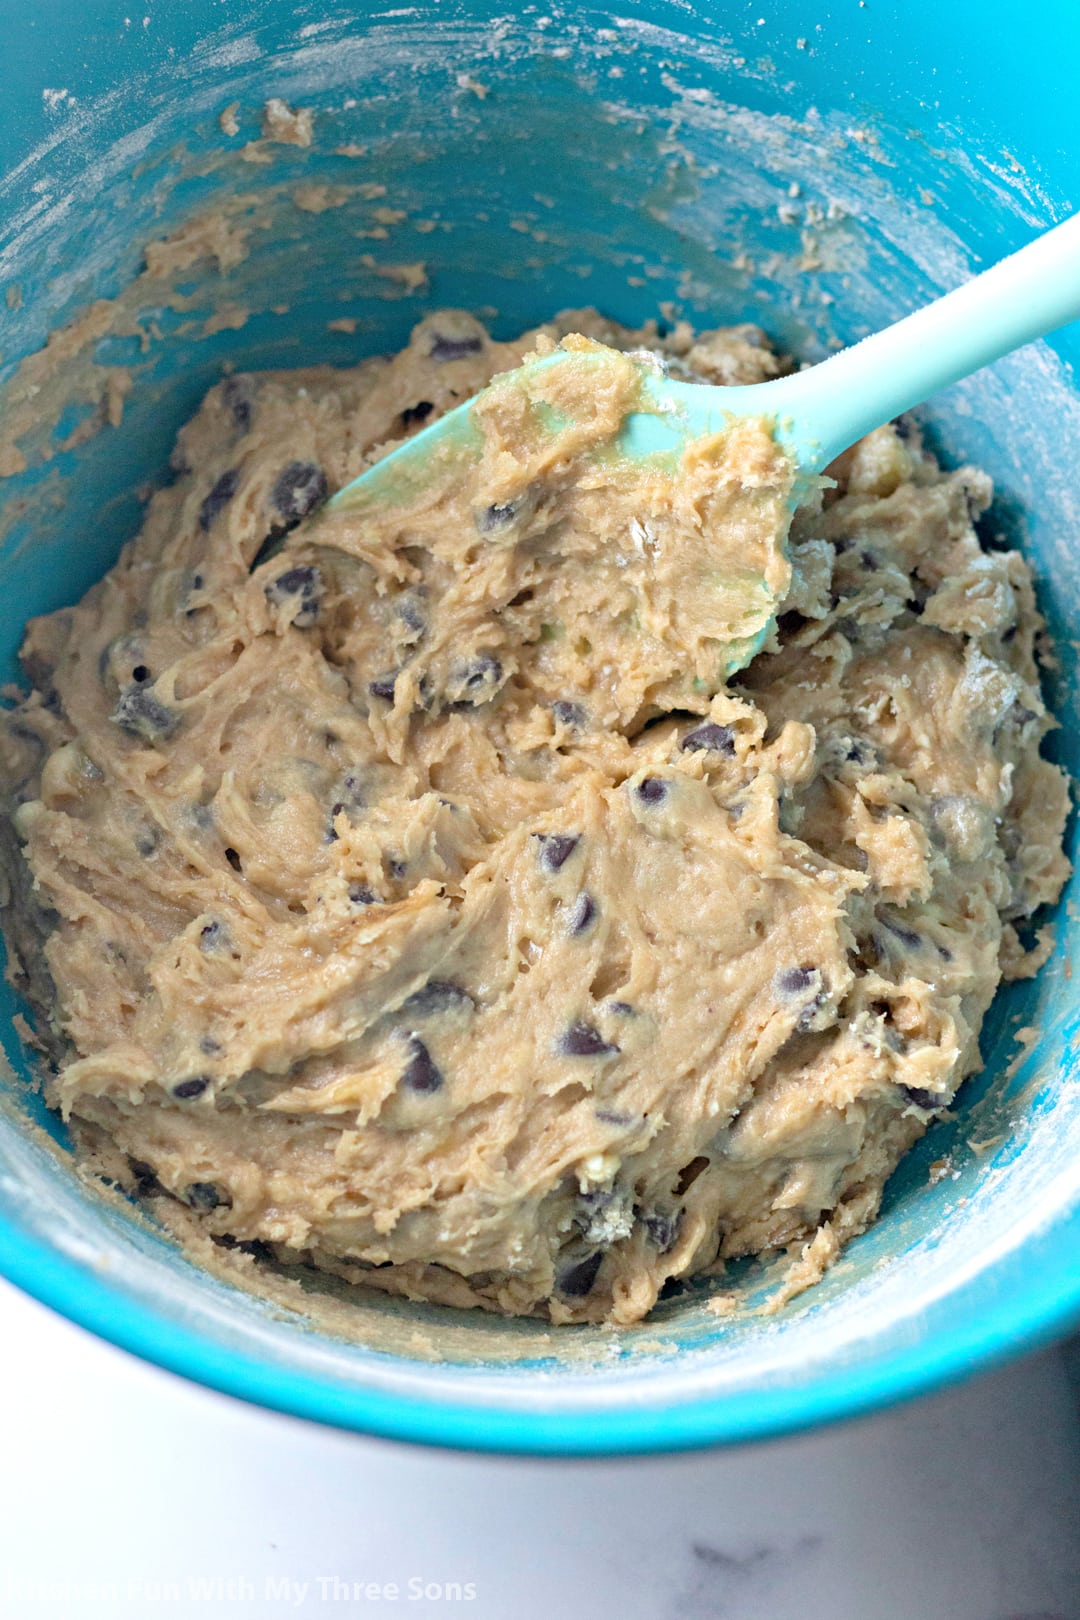 Chocolate chip banana bread cookie dough in a blue mixing dish